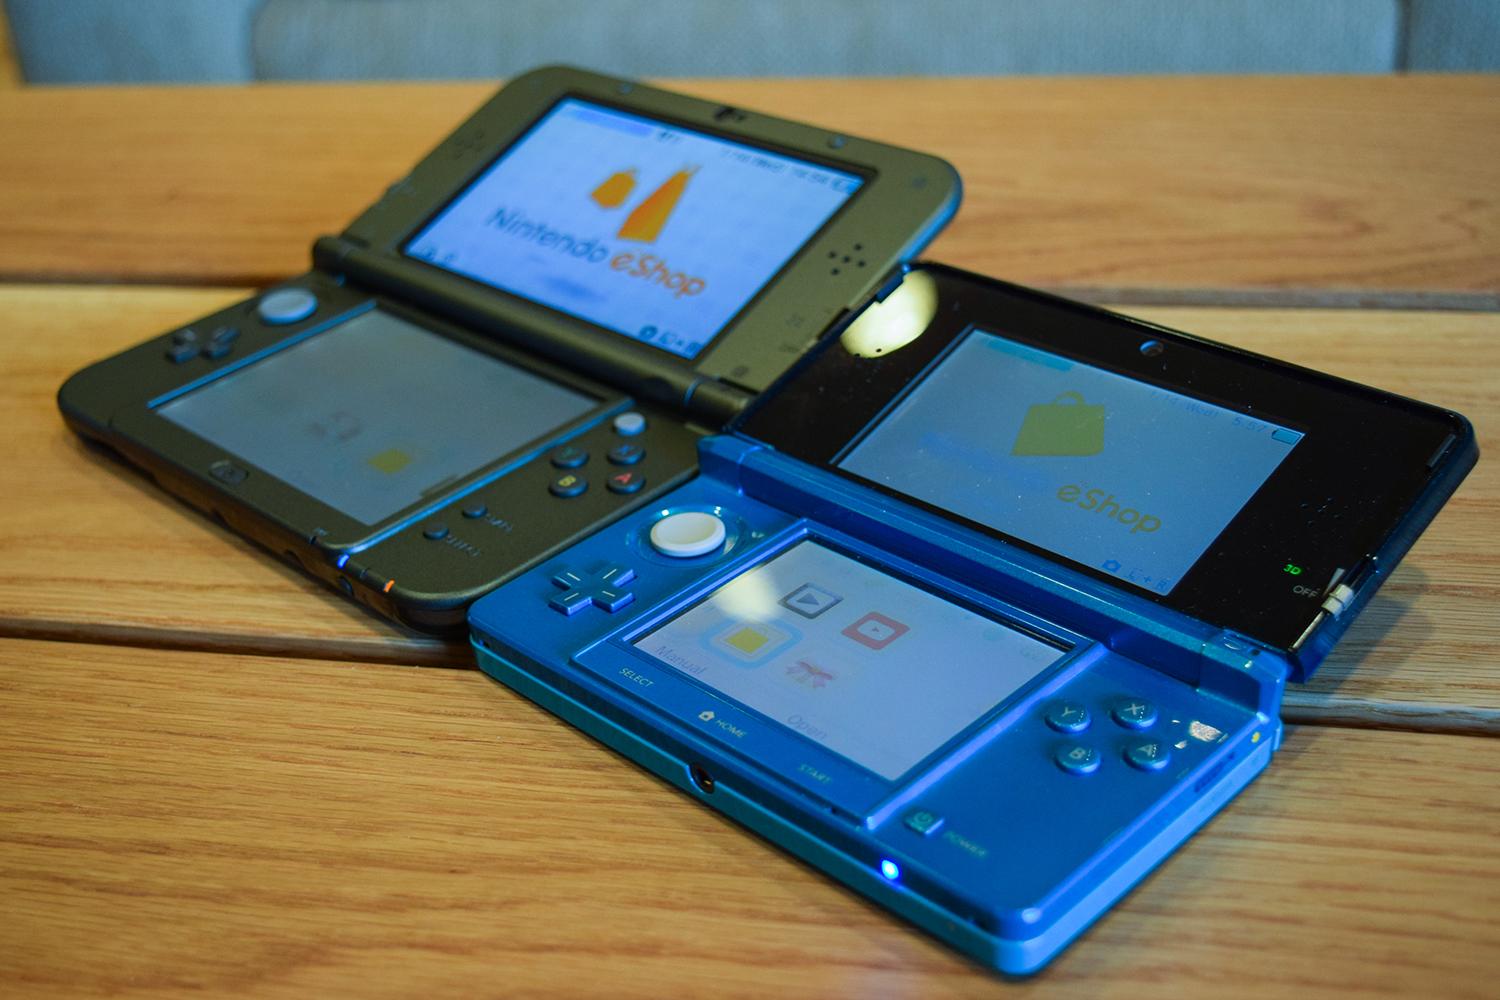 The Most Common Nintendo 3DS Problems and How to Fix Them